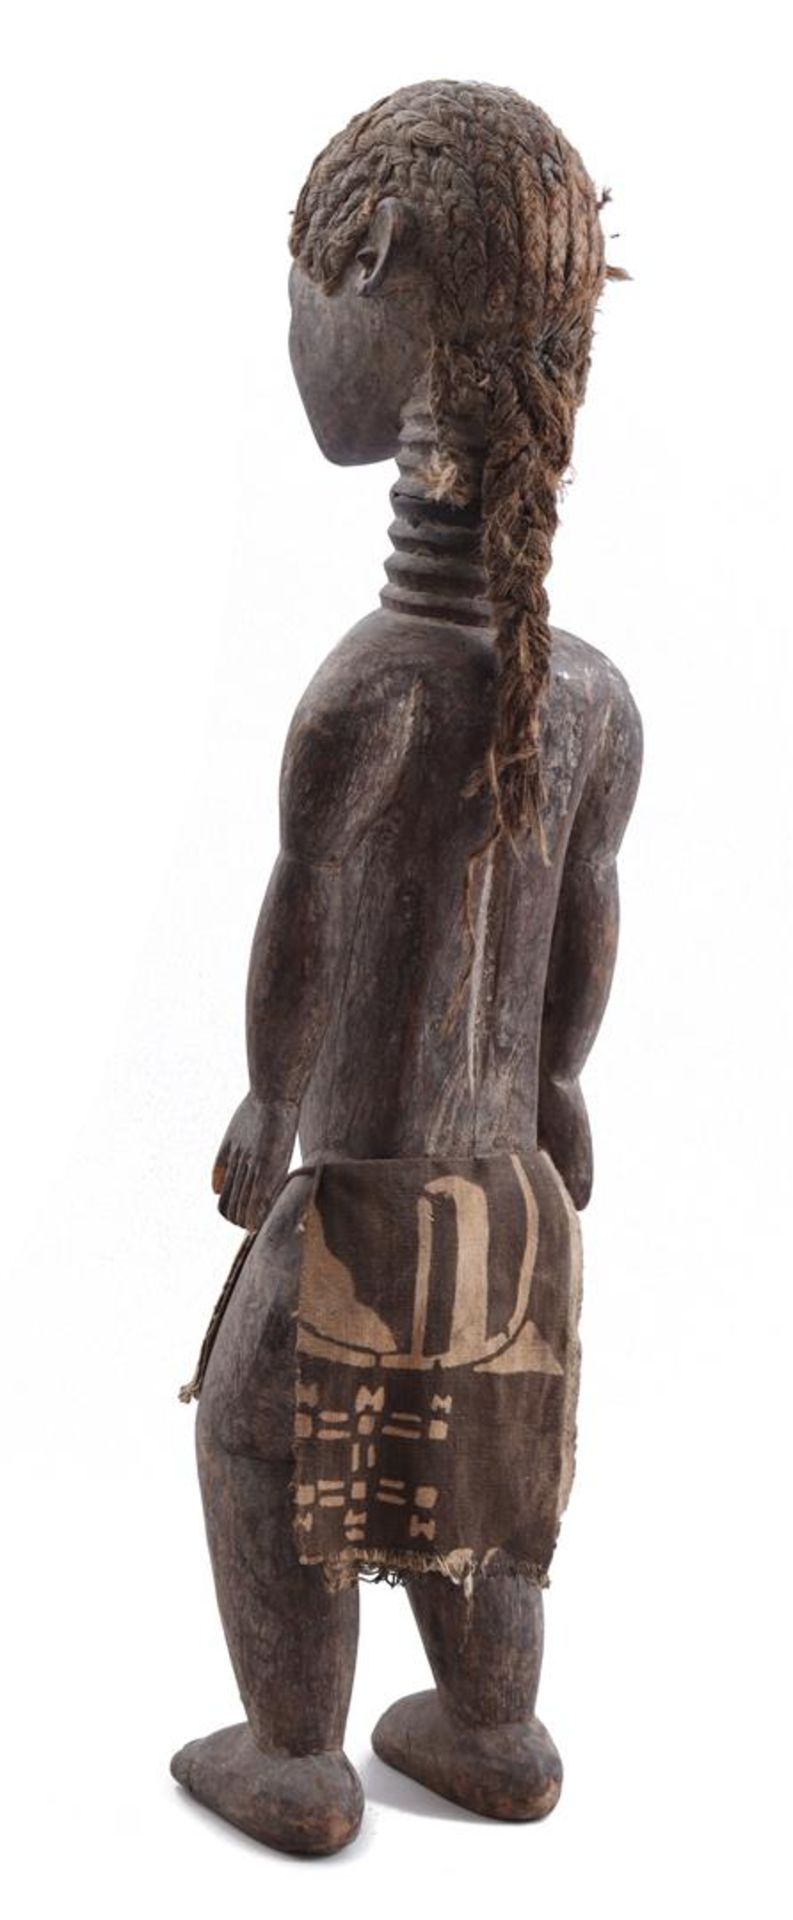 Ceremonial wooden statue, Mossi tribe - Image 3 of 3